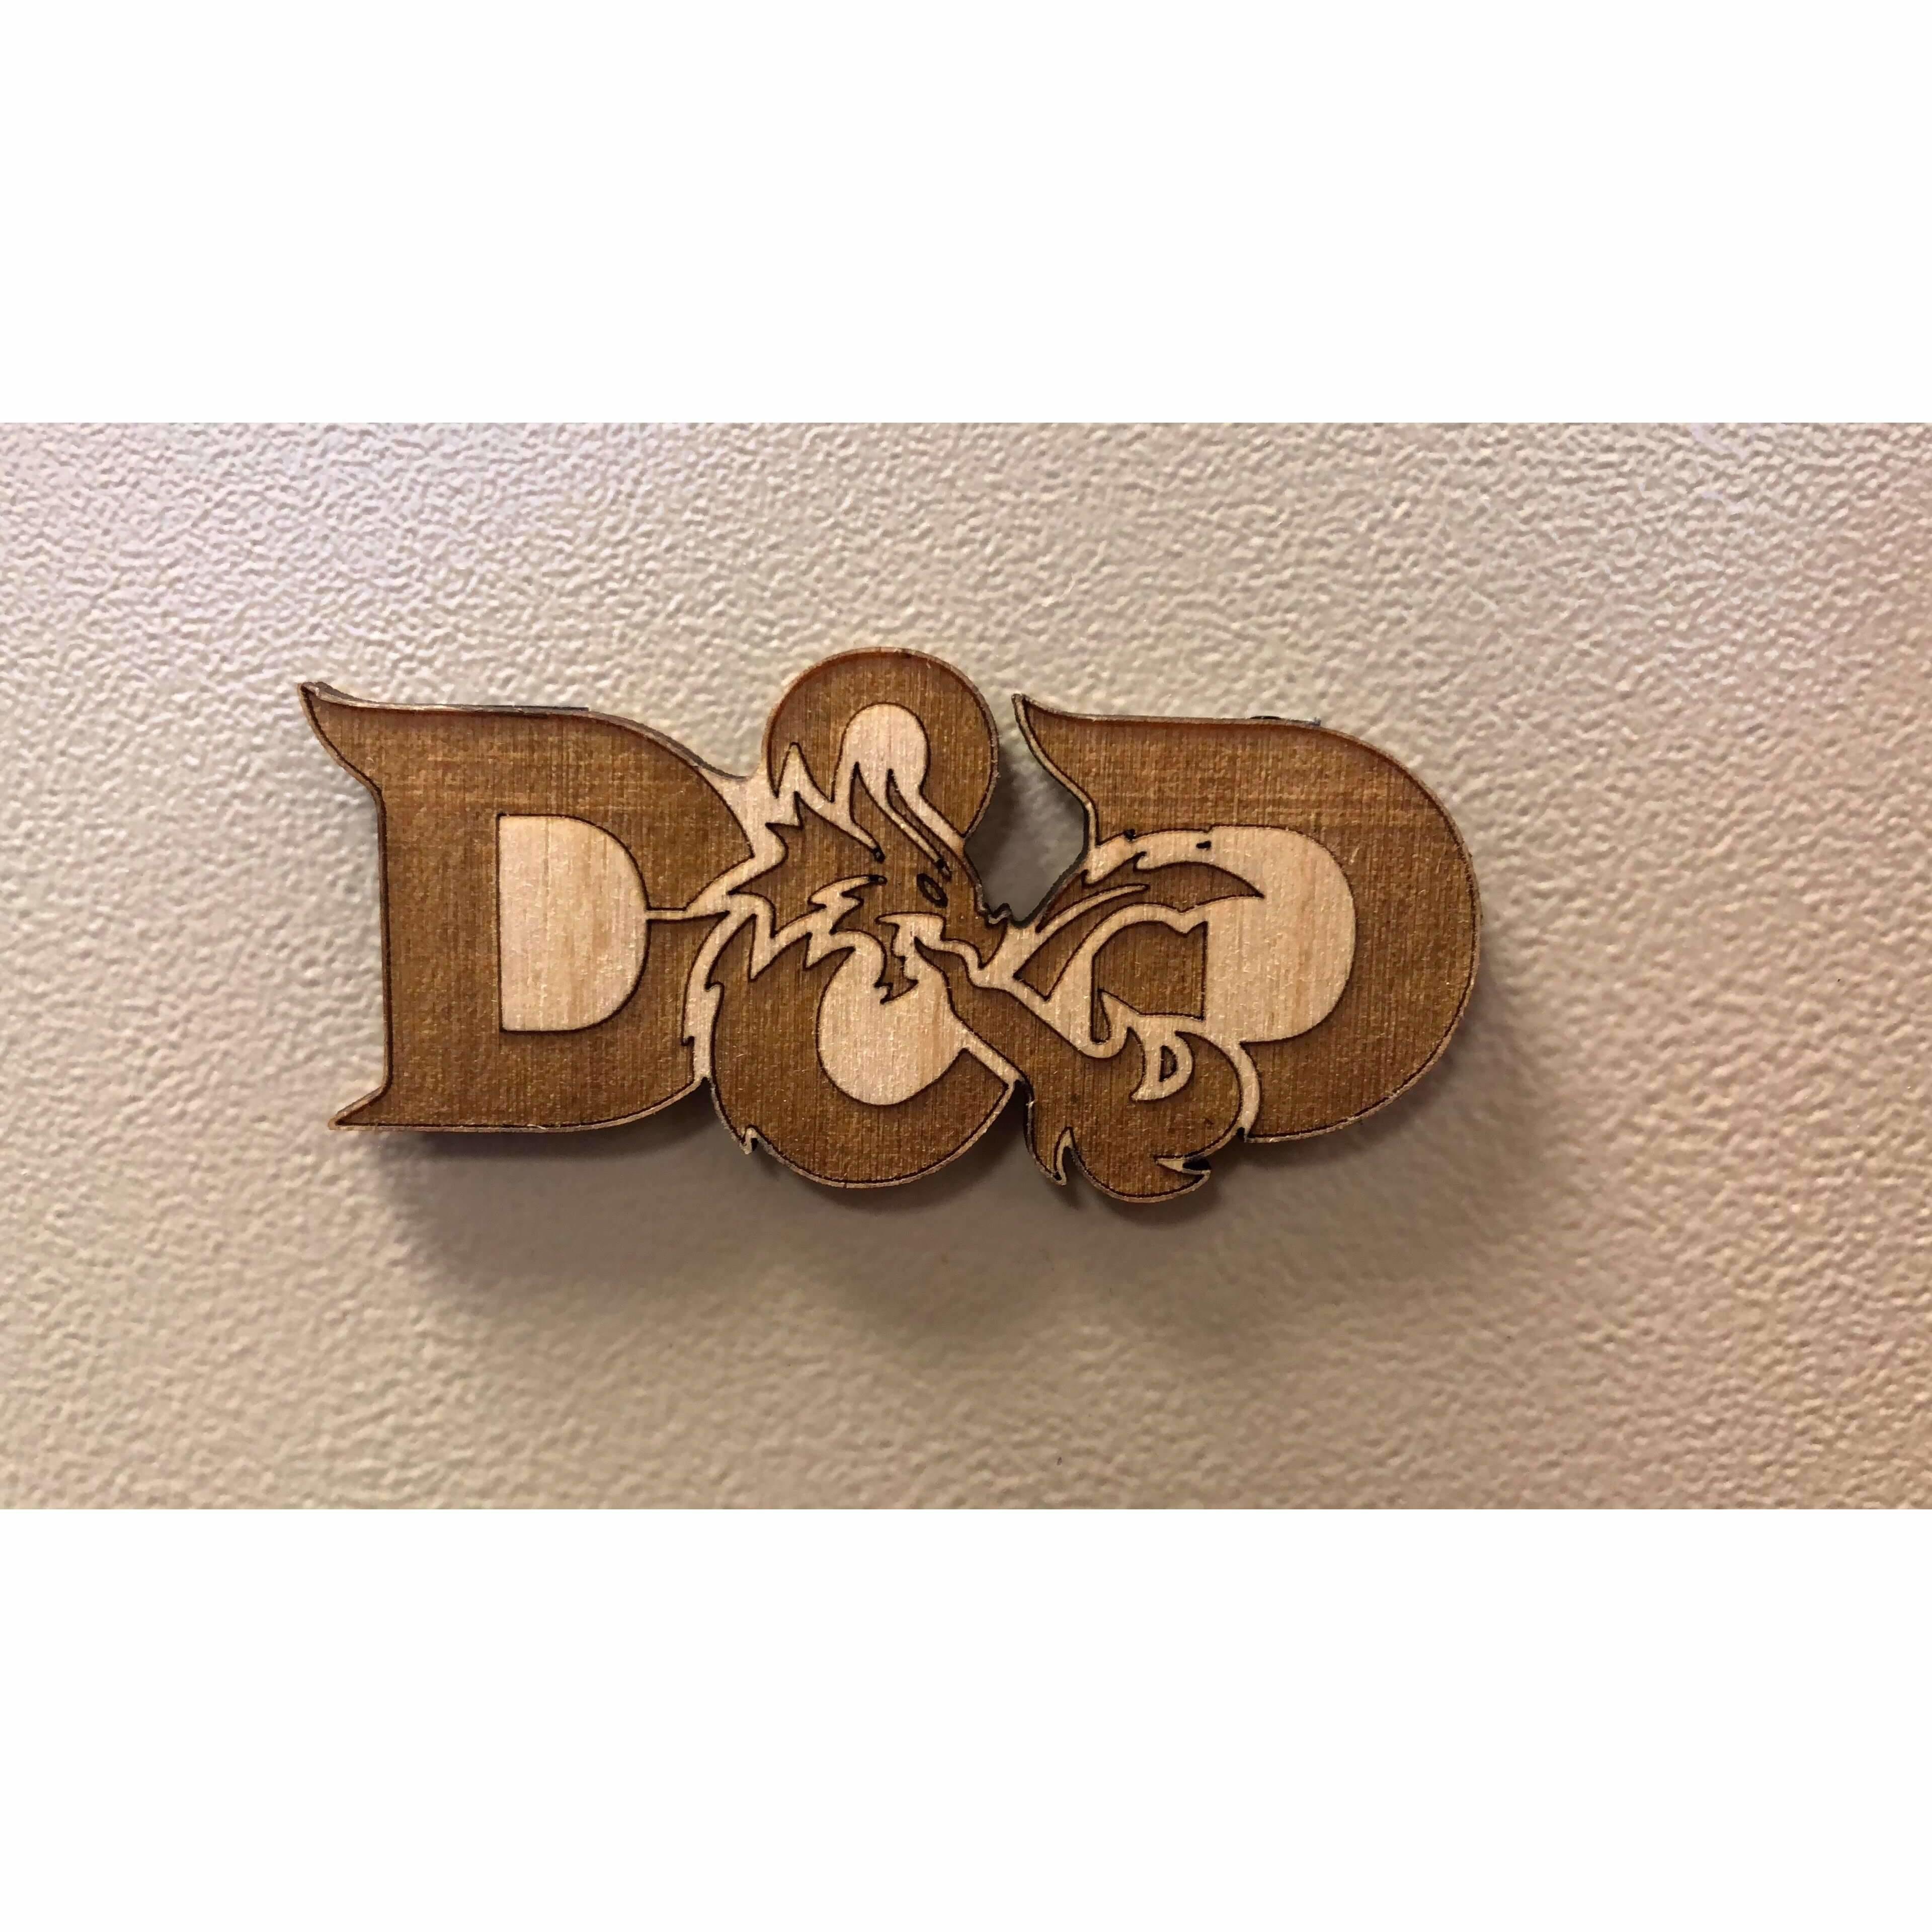 Red Berry Crafts Ltd:Dungeons & Dragons Inspired Fridge Magnet